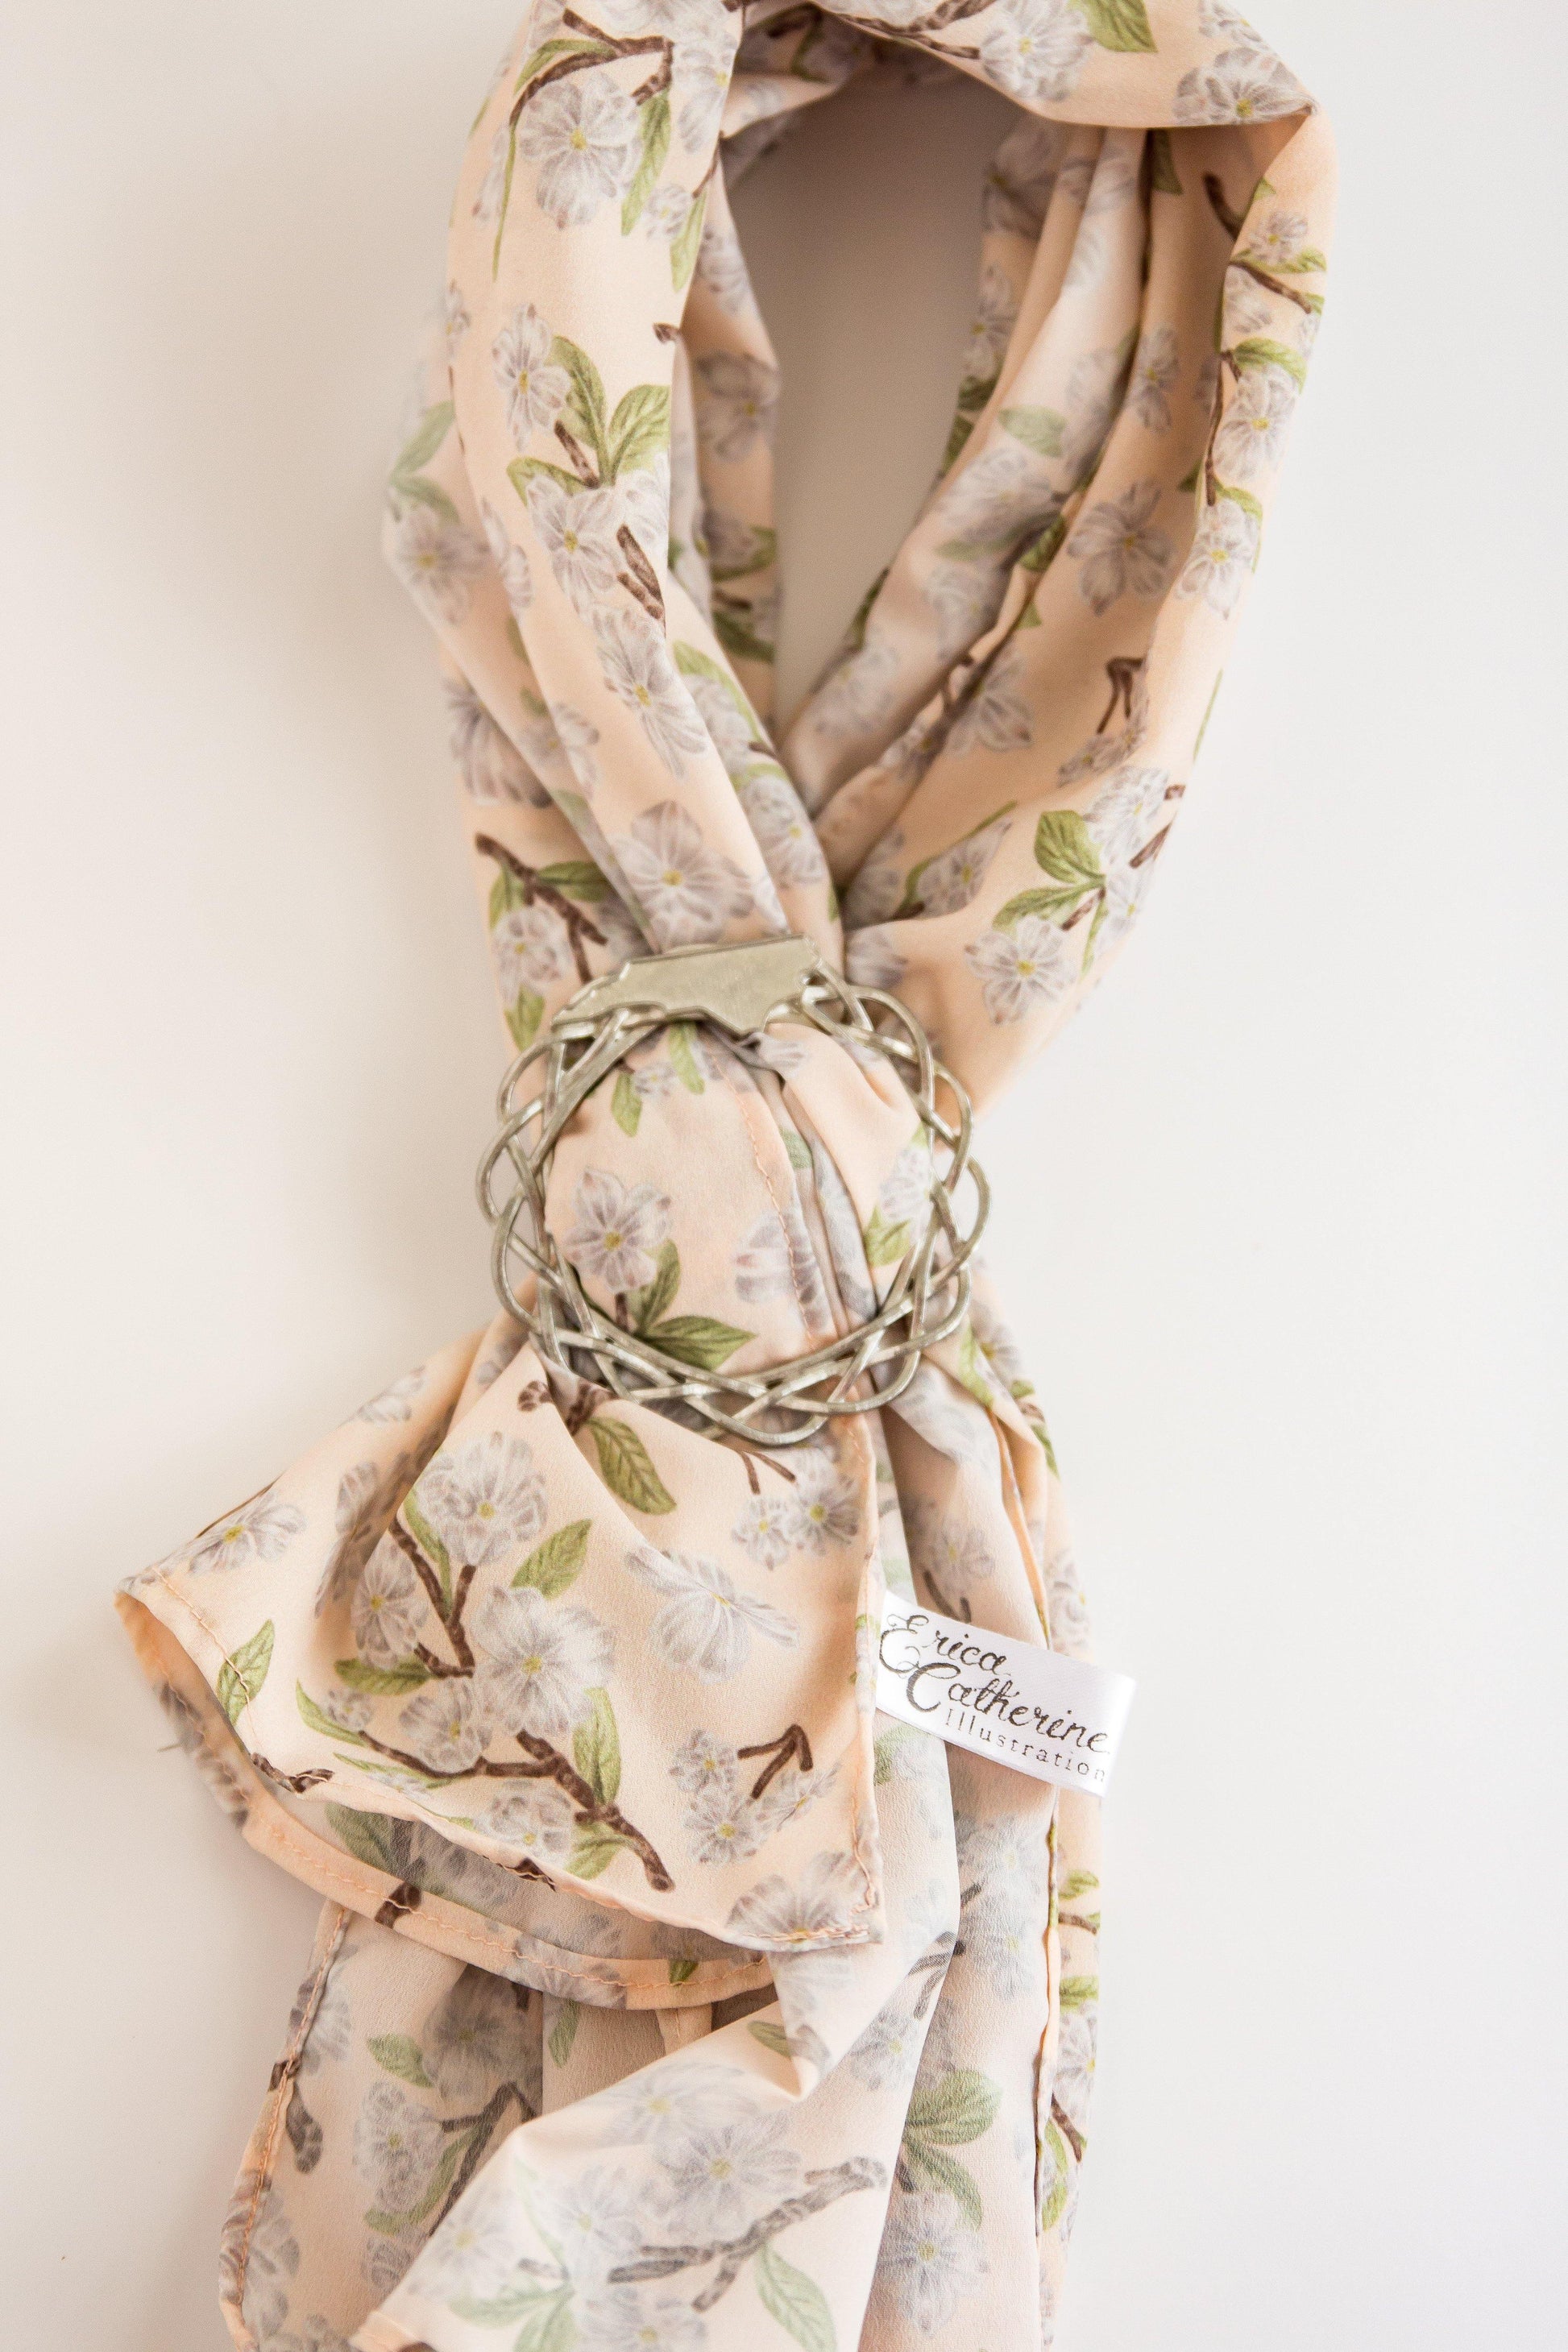 southern charm scarf ring gift set